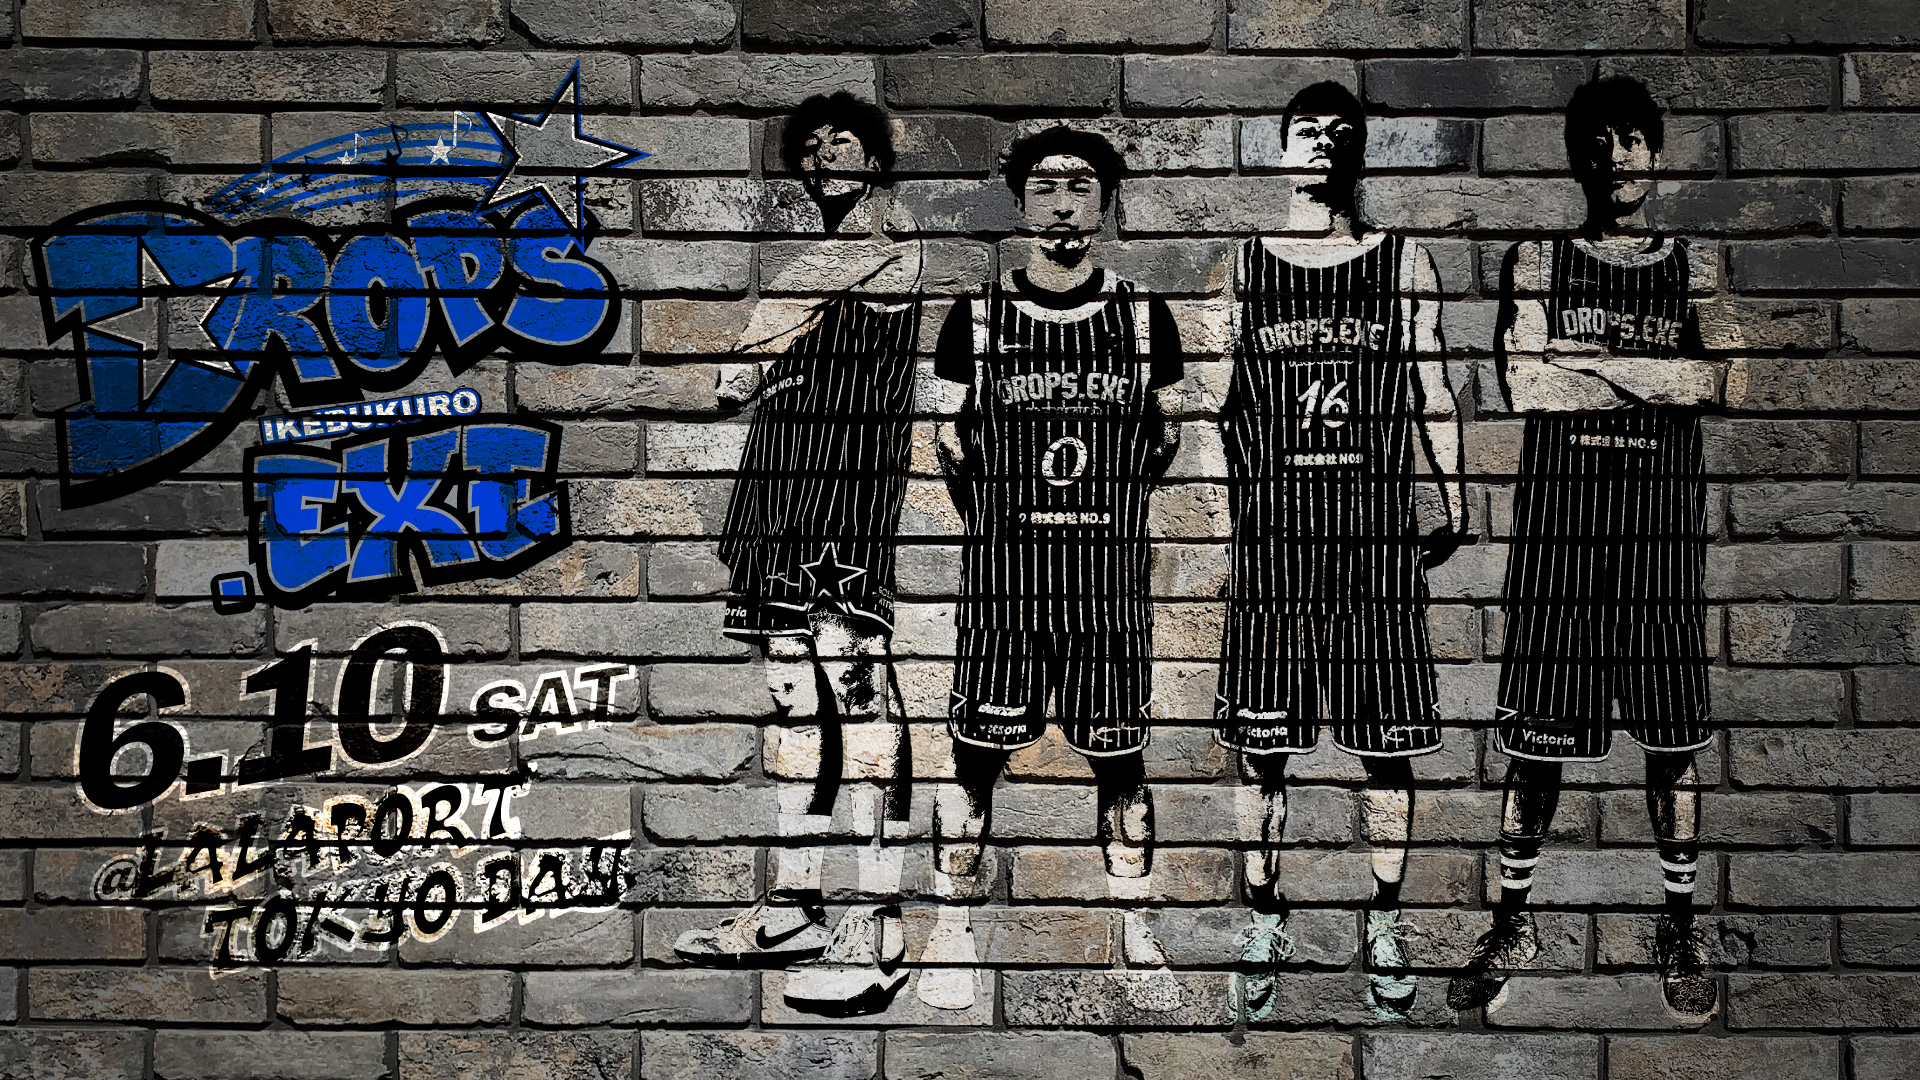 【ROSTER】 EASTERN Conference Round.3 @LALAPORT TOKYO-BAY 6/10